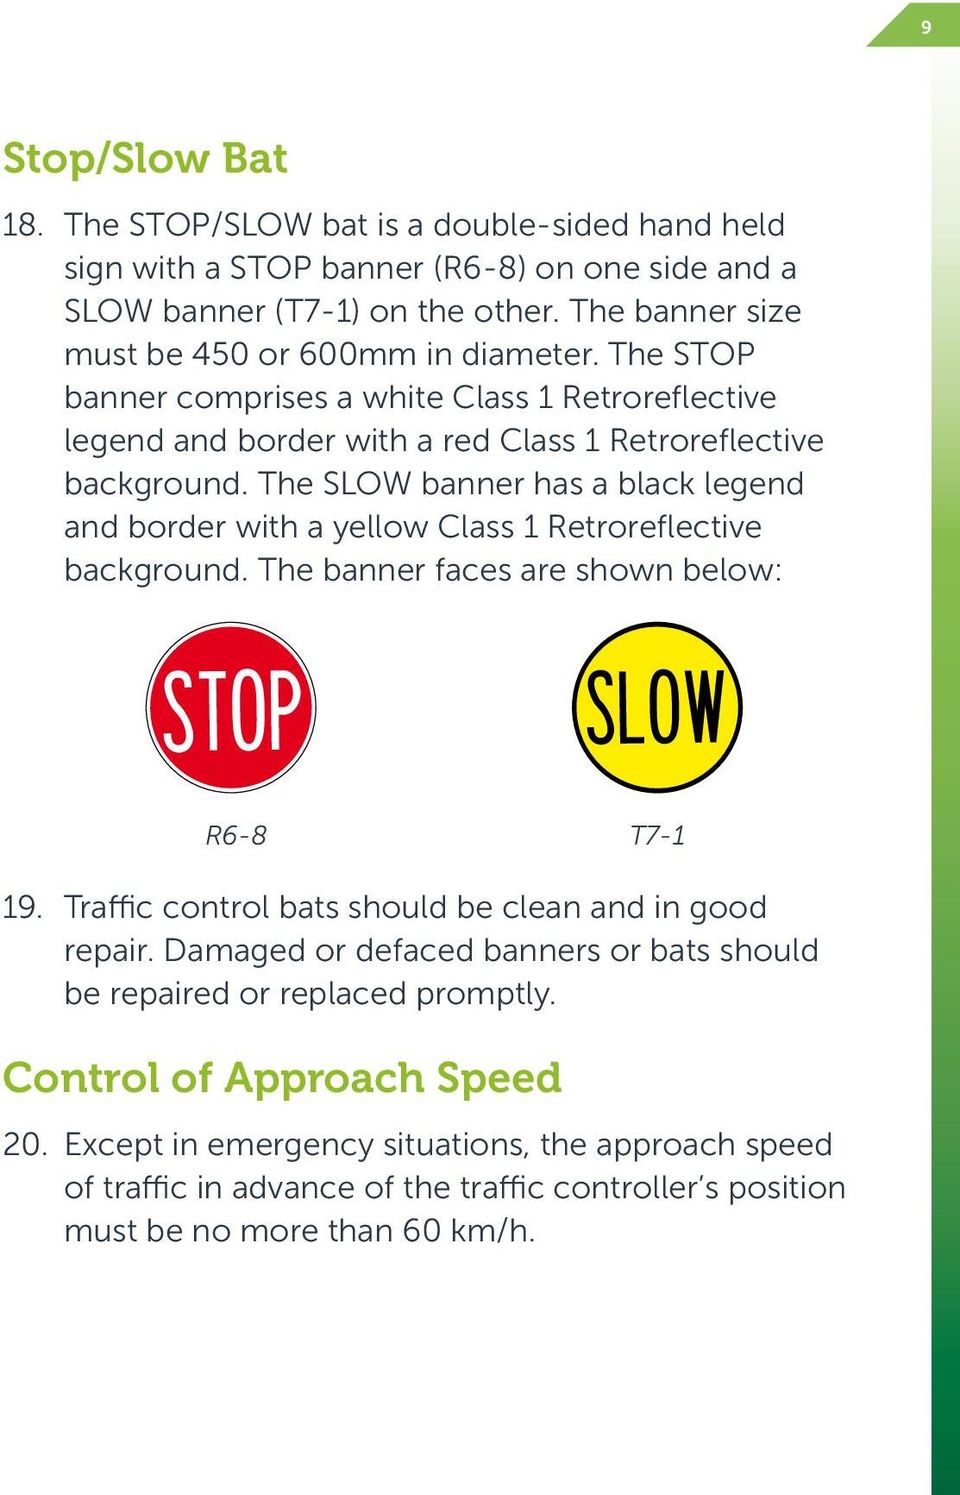 The SLOW banner has a black legend and border with a yellow Class 1 Retroreflective background. The banner faces are shown below: STOP SLOW R6-8 T7-1 19.